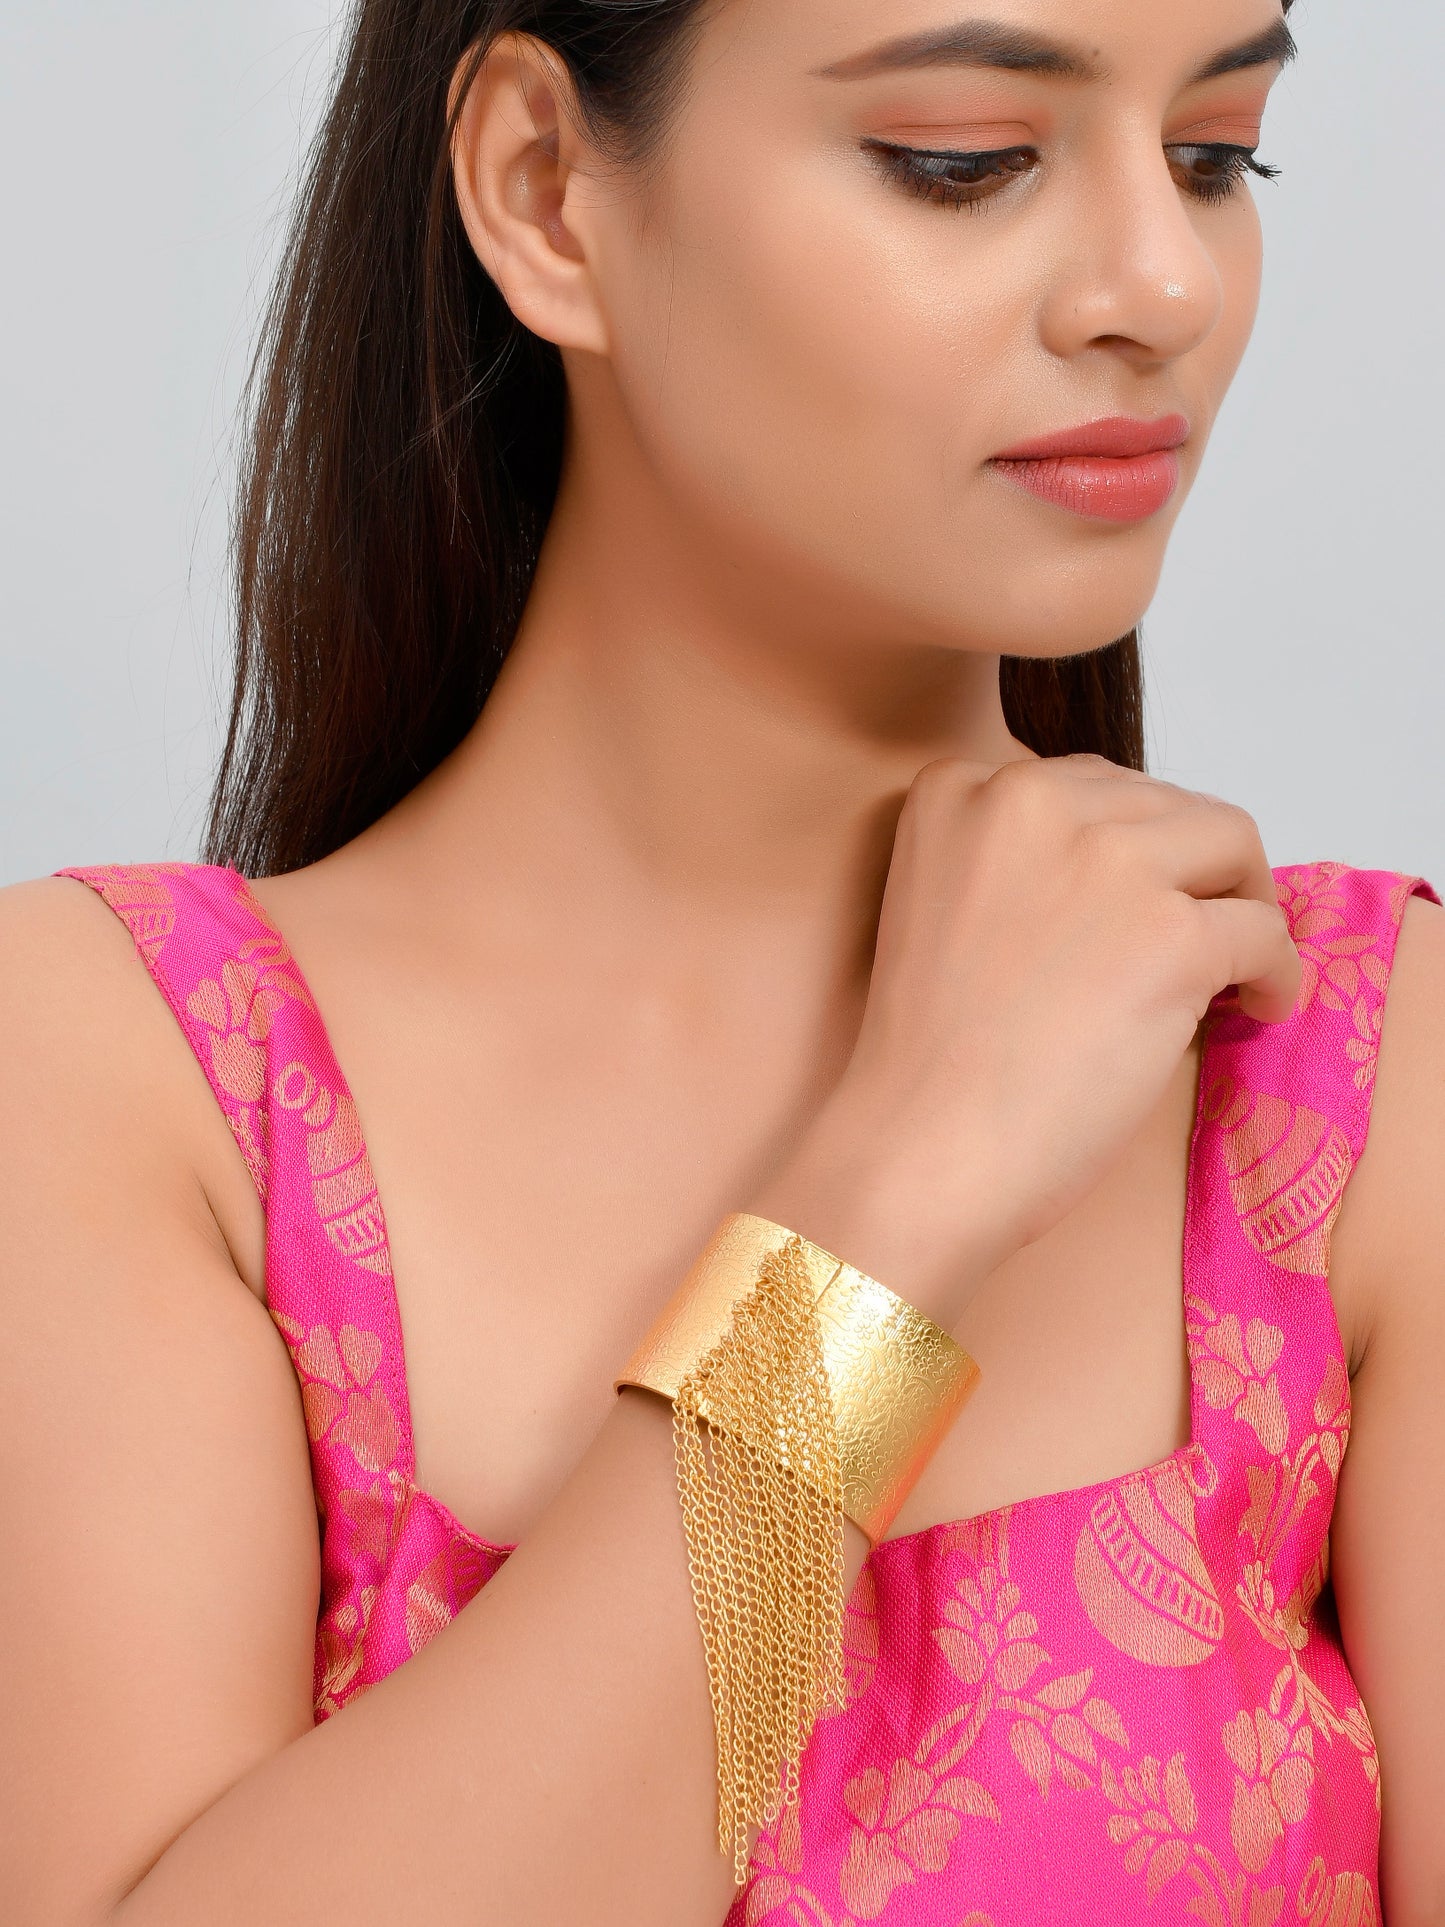 Gold Plated Trendy Statement Handcuff